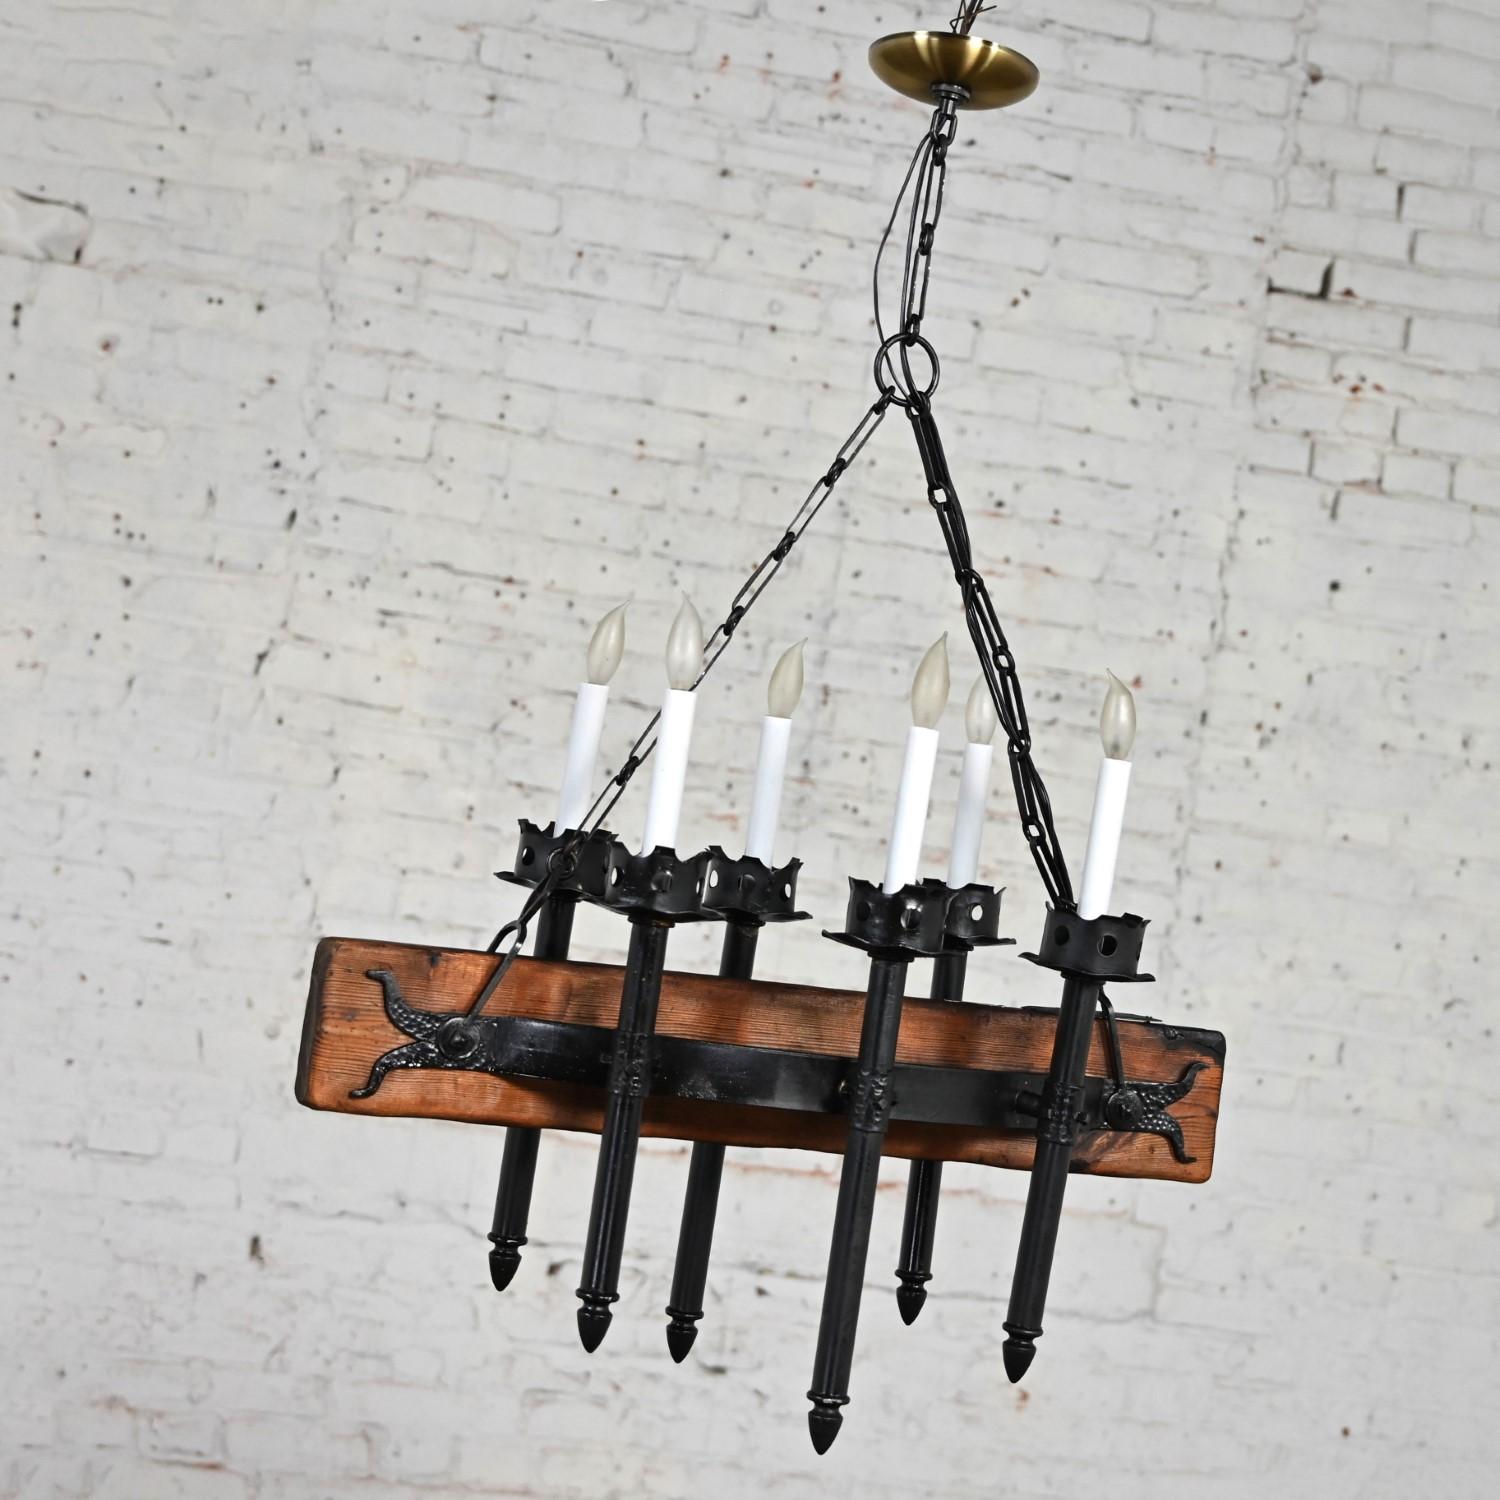 Medieval Gothic Spanish Revival Iron & Wood Beam Hanging Light Fixture Mexico For Sale 11